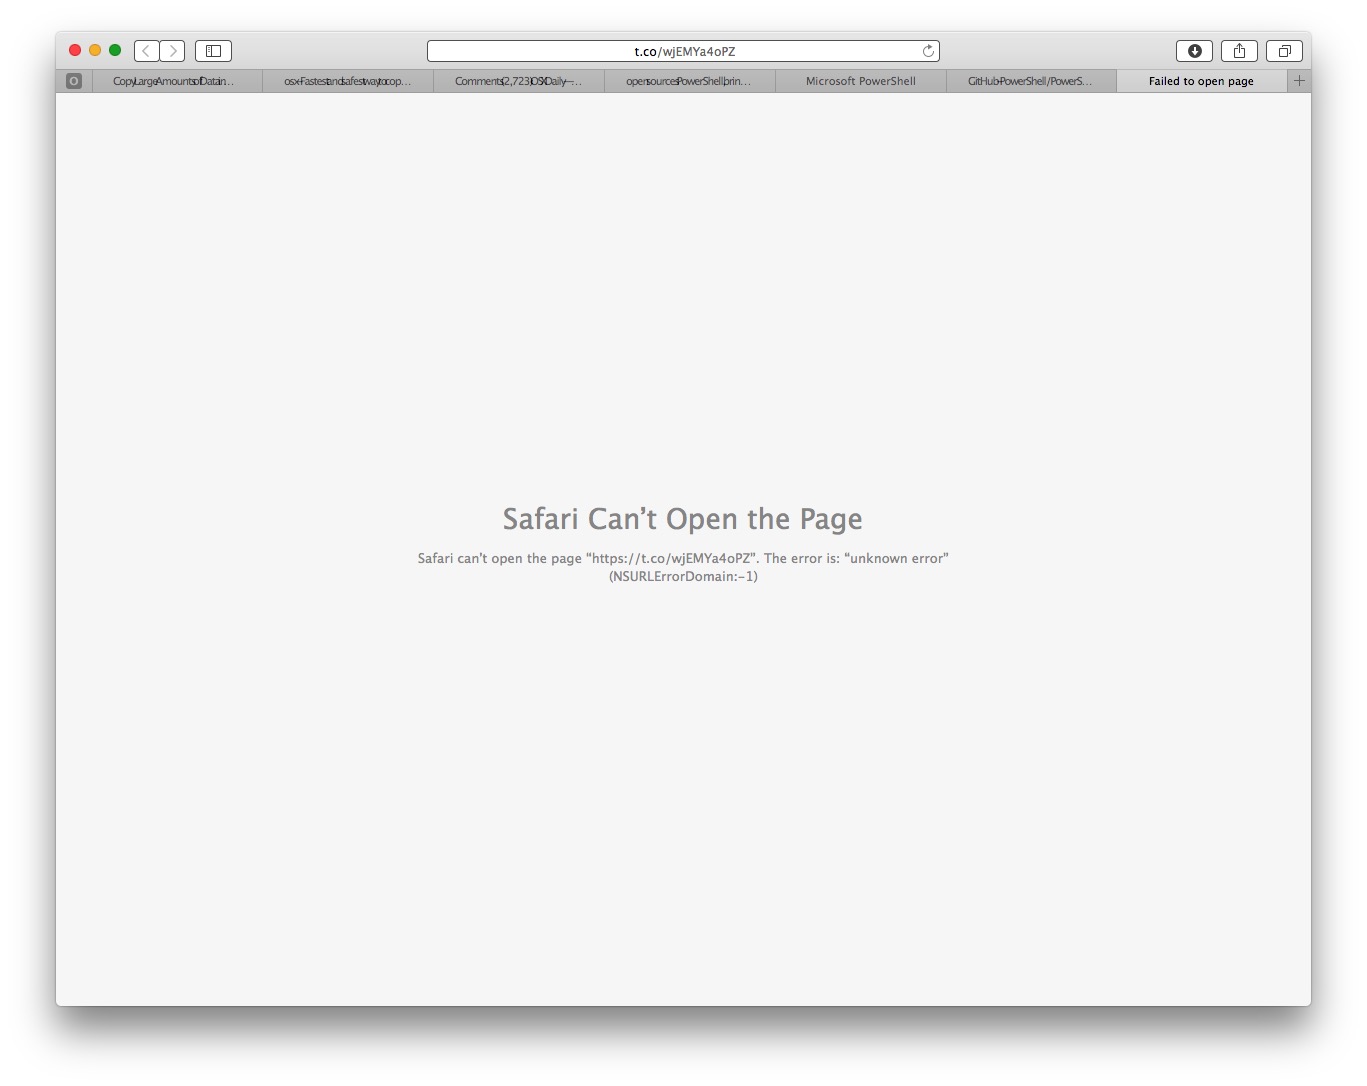 Why can't Safari open a page?